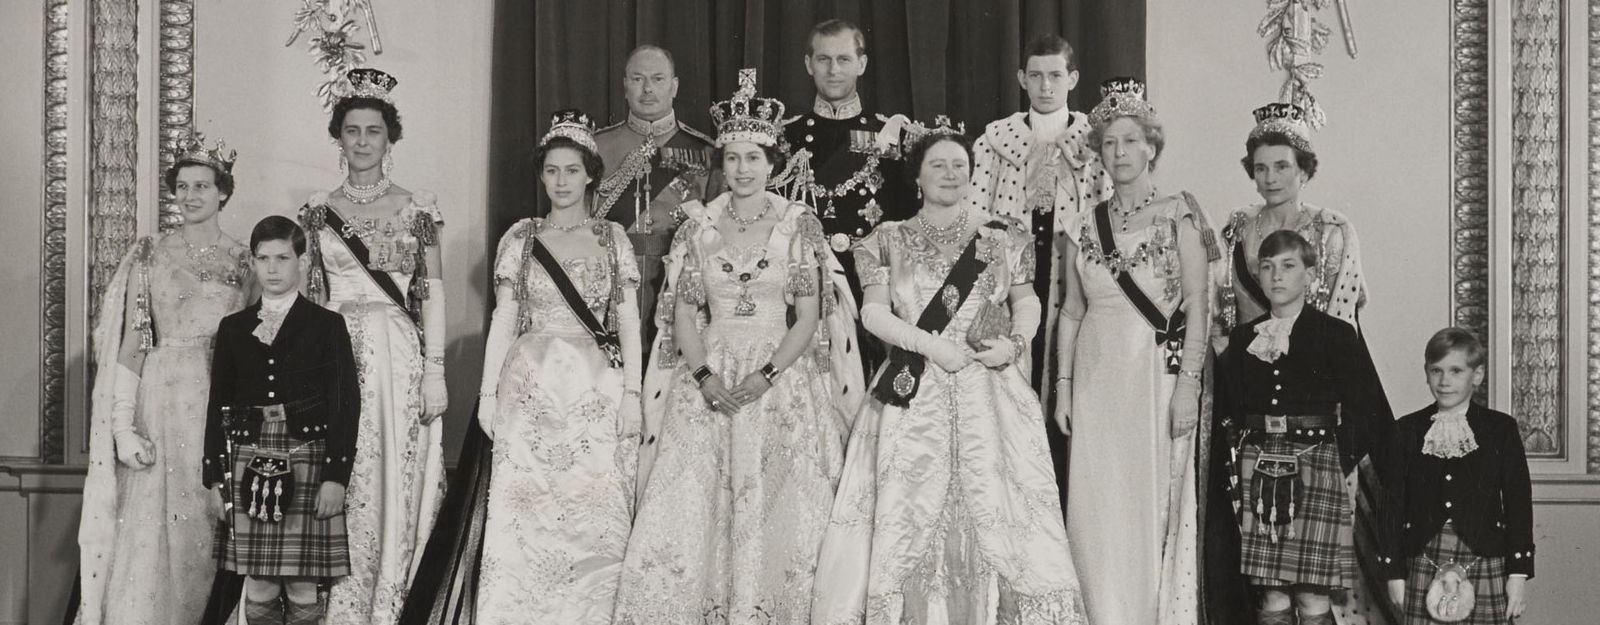 Photograph of The Queen and royal family on coronation day